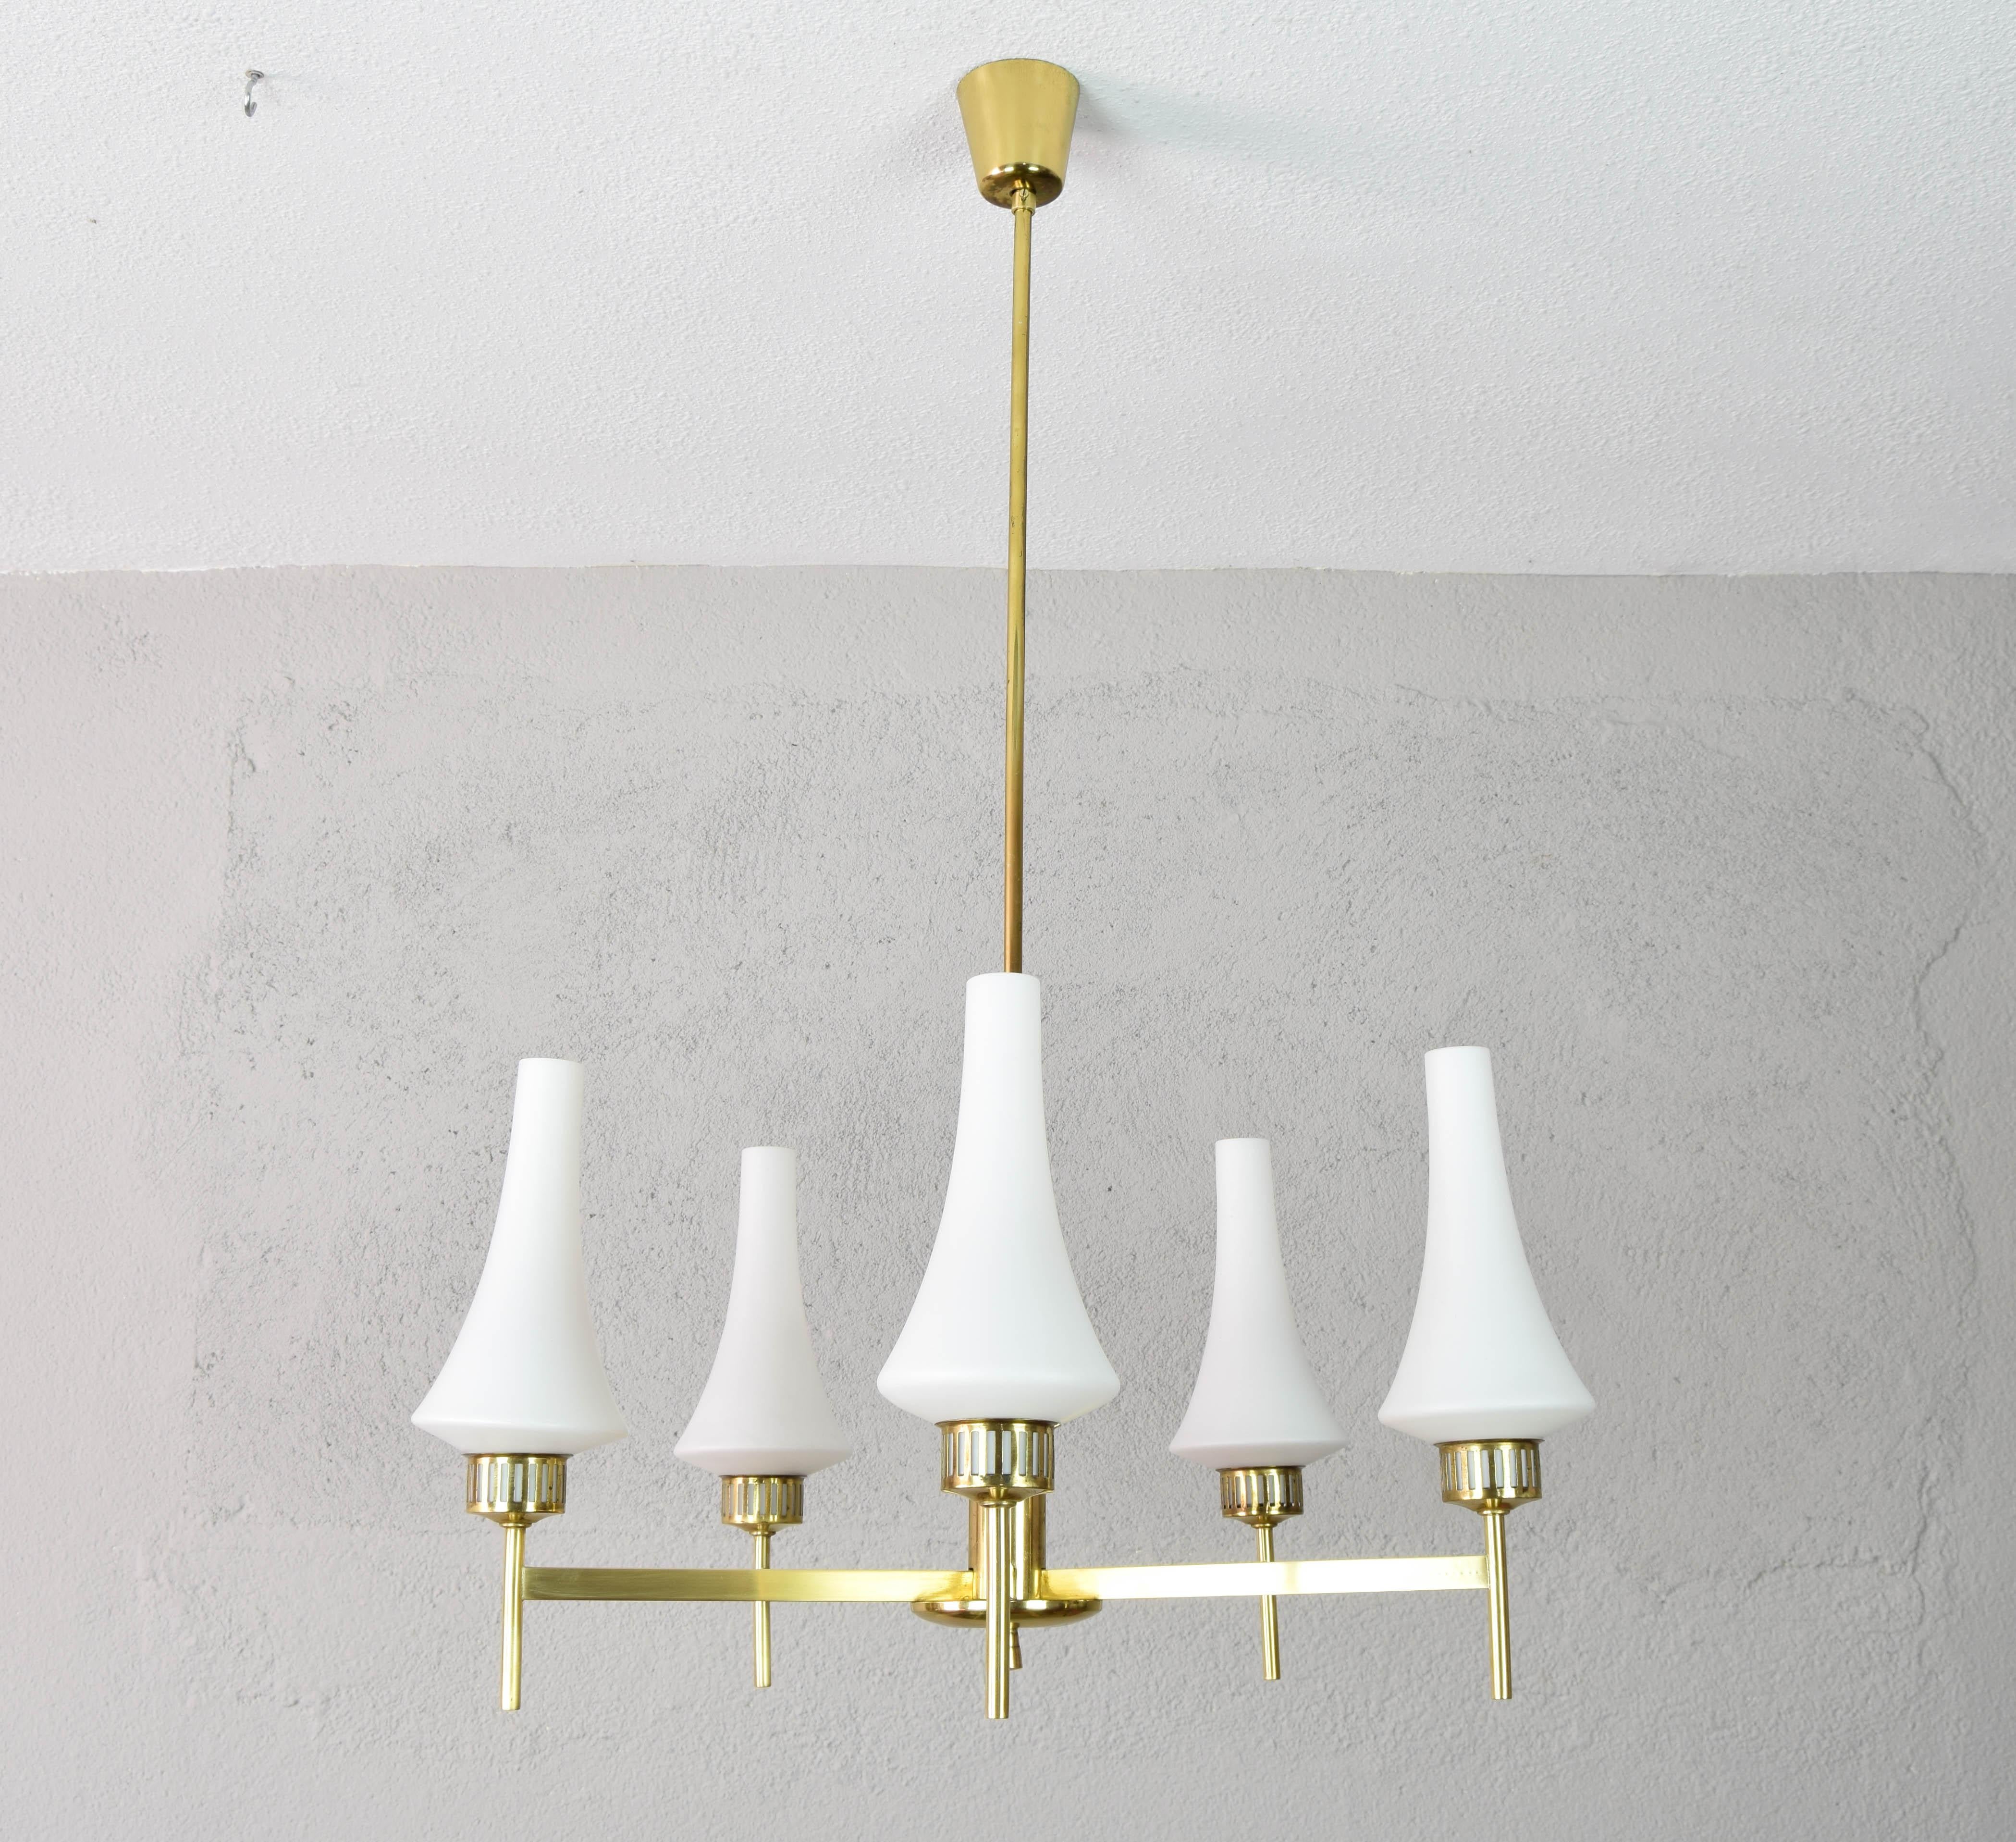 Beautiful Swedish chandelier from the 1950s. Its brass body has five arms with opaline lampshades.
Similar in style to Kaiser's brass chandeliers, it has a characteristic delicacy and elegance.
The chandelier presents in the brass finish marks of